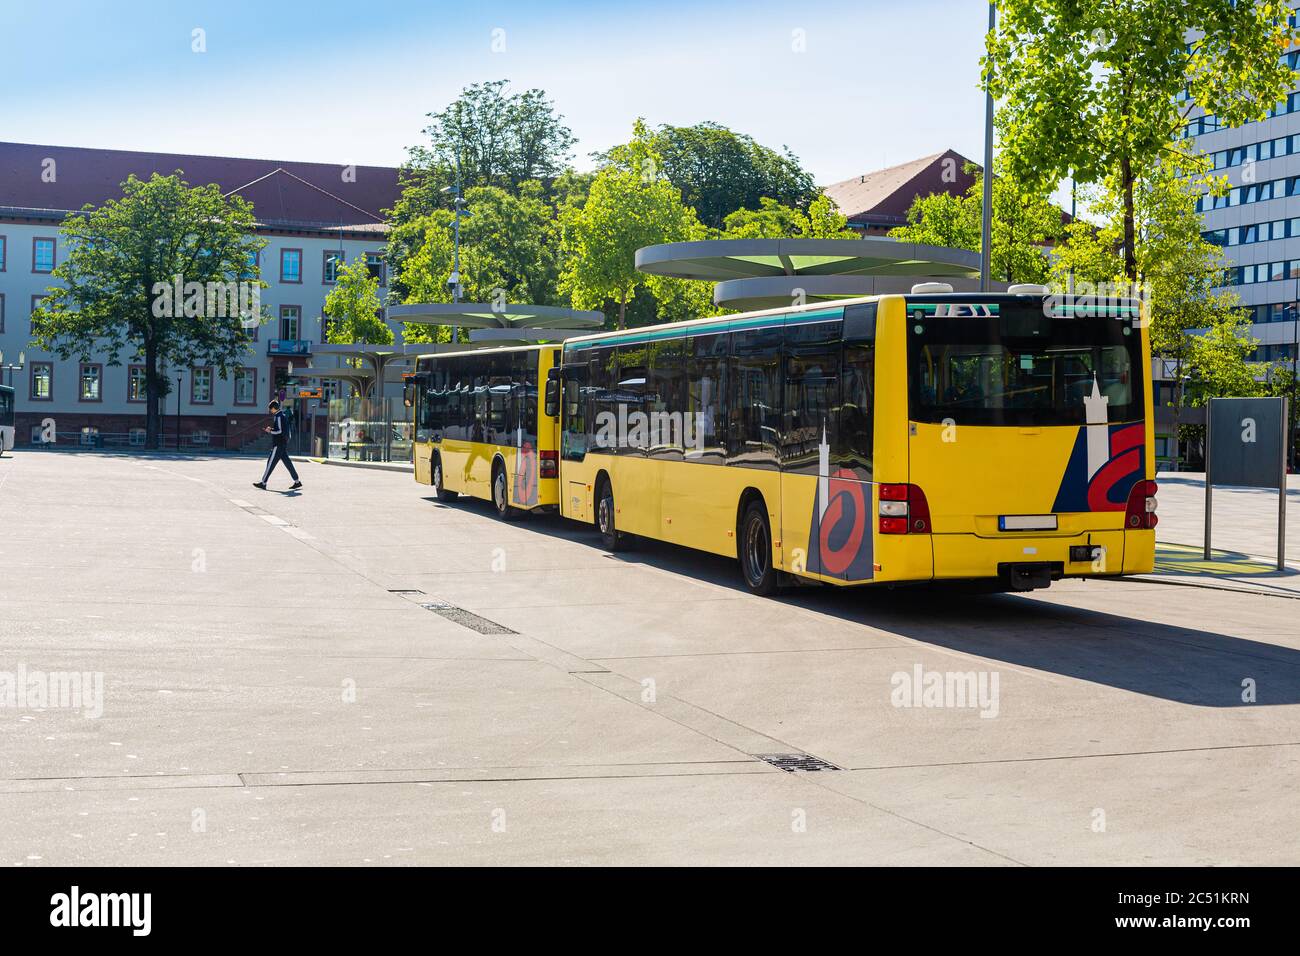 Yellow buses. Public transport in Germany. Last station. Summer in city. Parked buses. Stock Photo